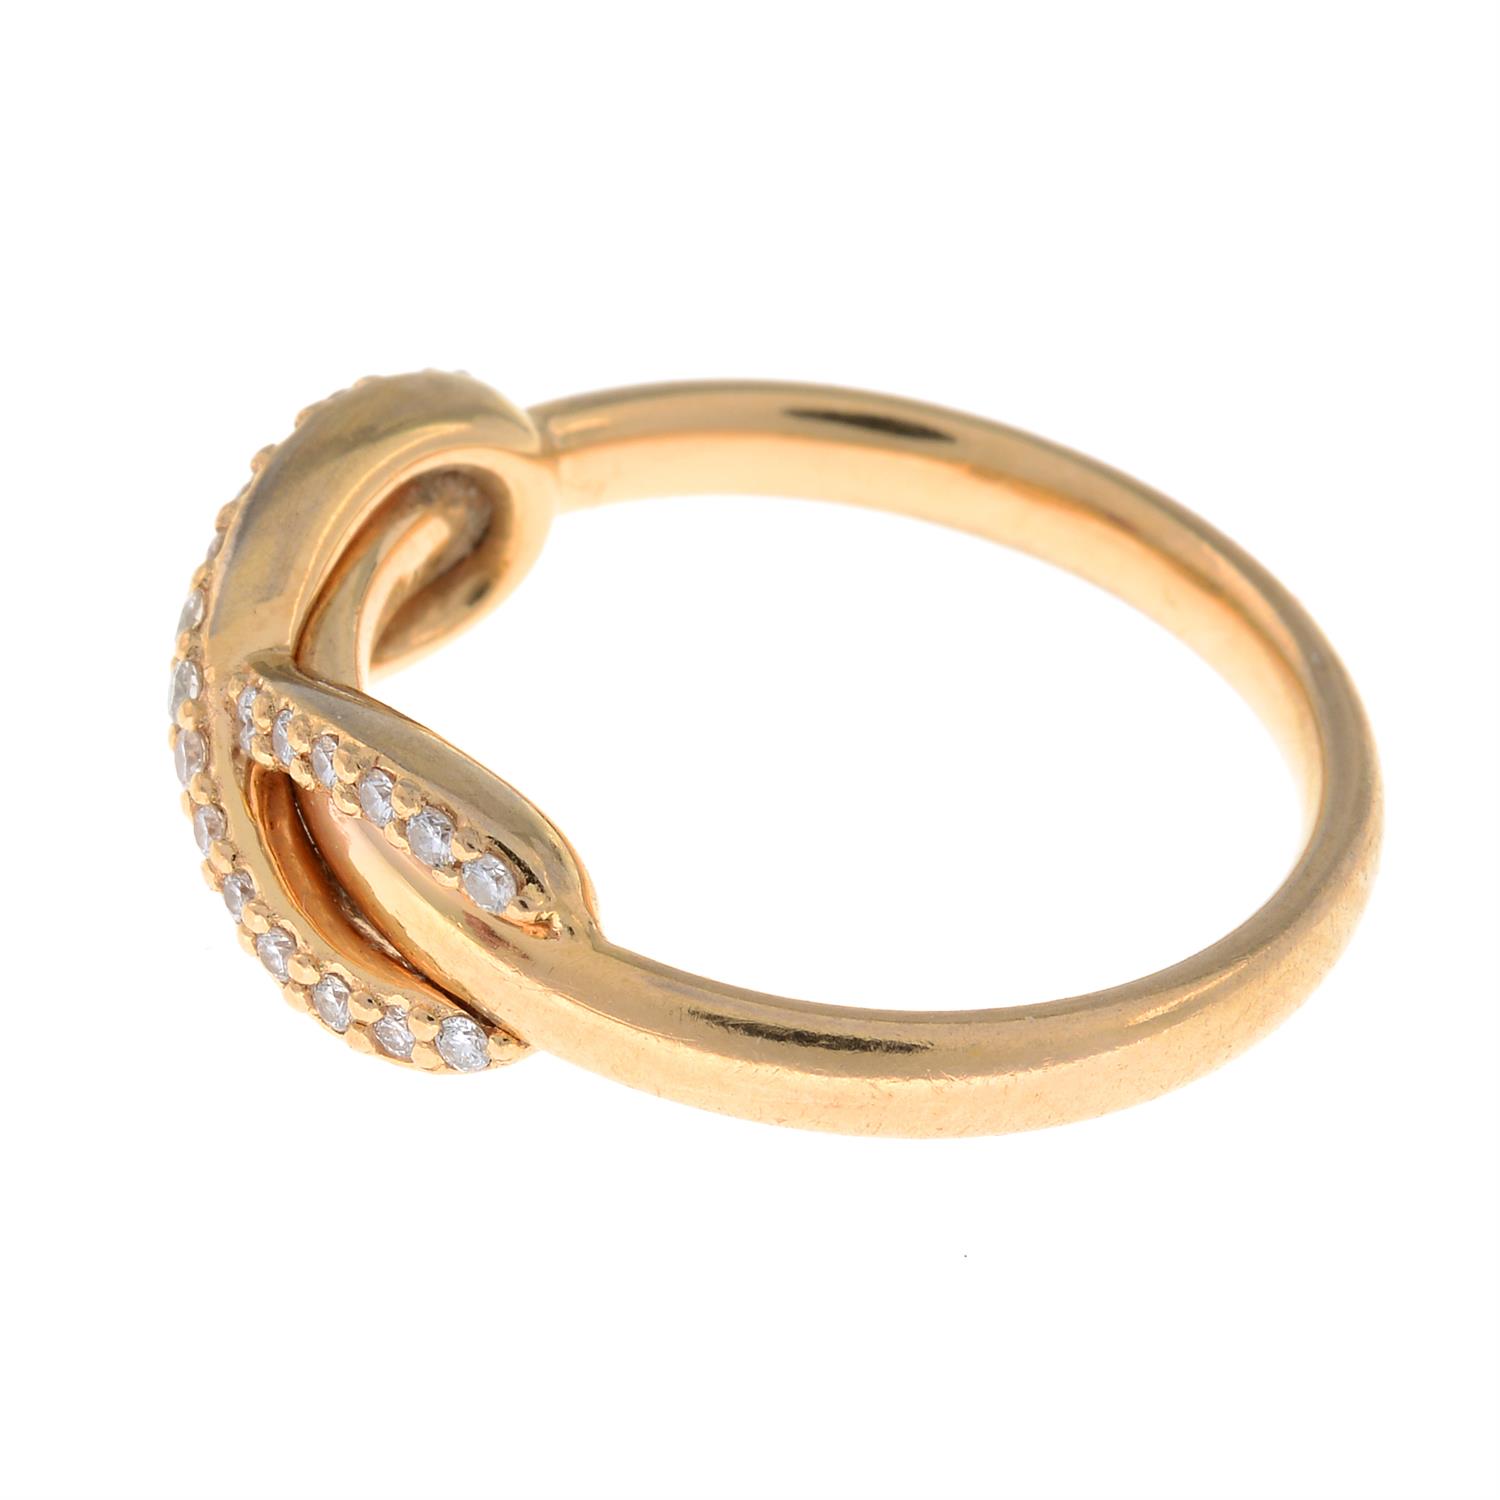 Diamond 'Infinity' ring, by Tiffany & Co. - Image 4 of 5